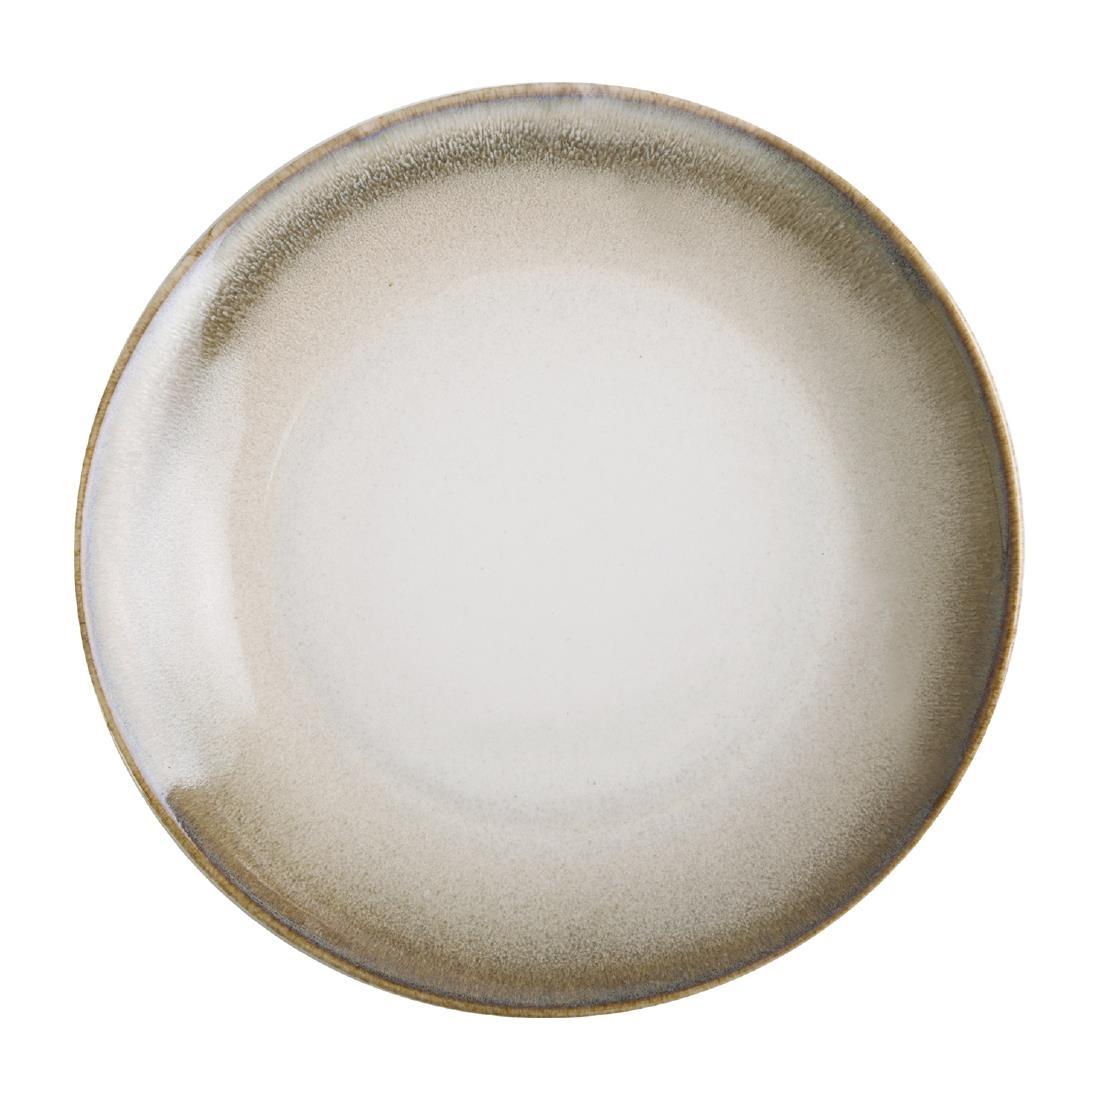 Olympia Birch Taupe Coupe Plates 205mm (Pack of 6) - DR782  - 1